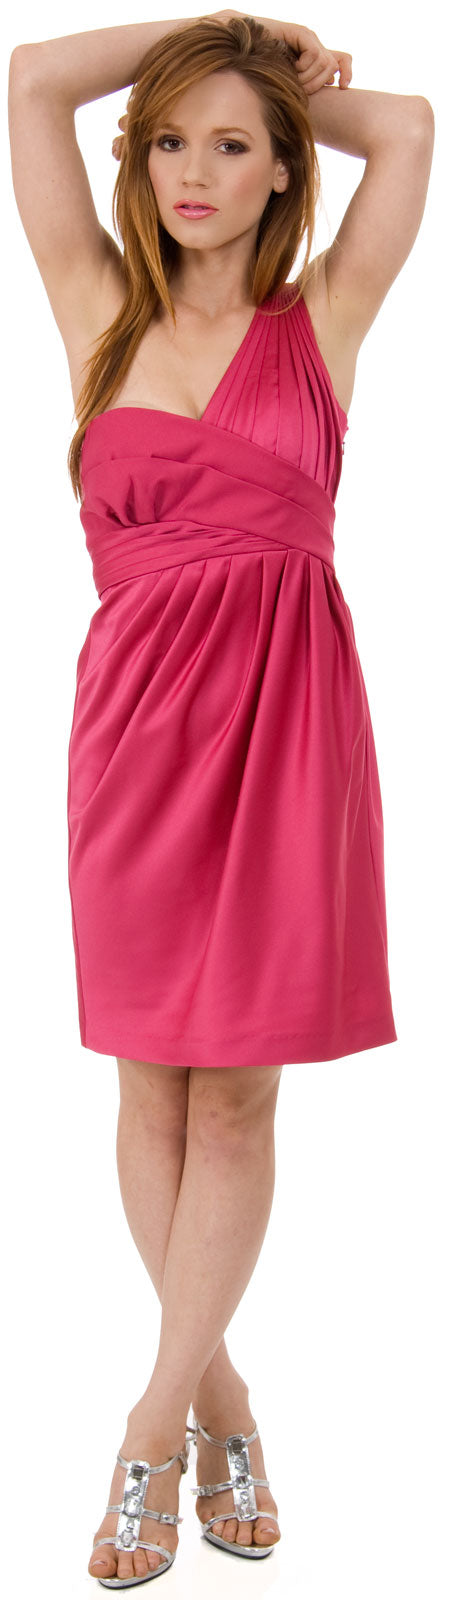 Image of Bridal Satin One Shoulder Cocktail Dress in Fuchsia